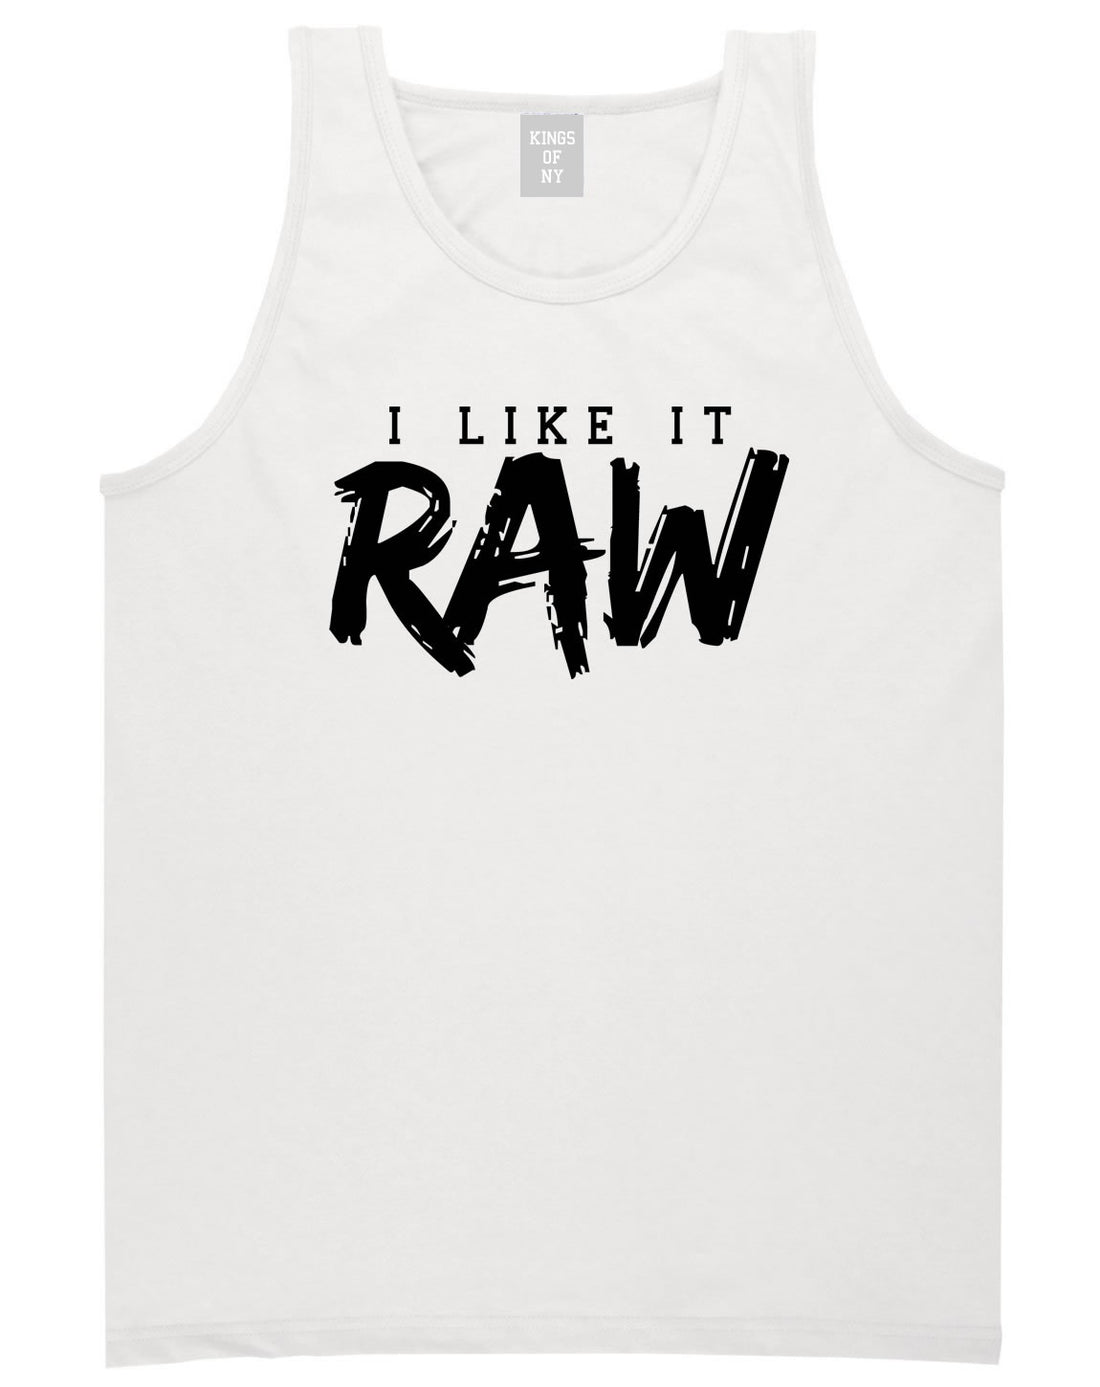 I Like It Raw Tank Top in White By Kings Of NY